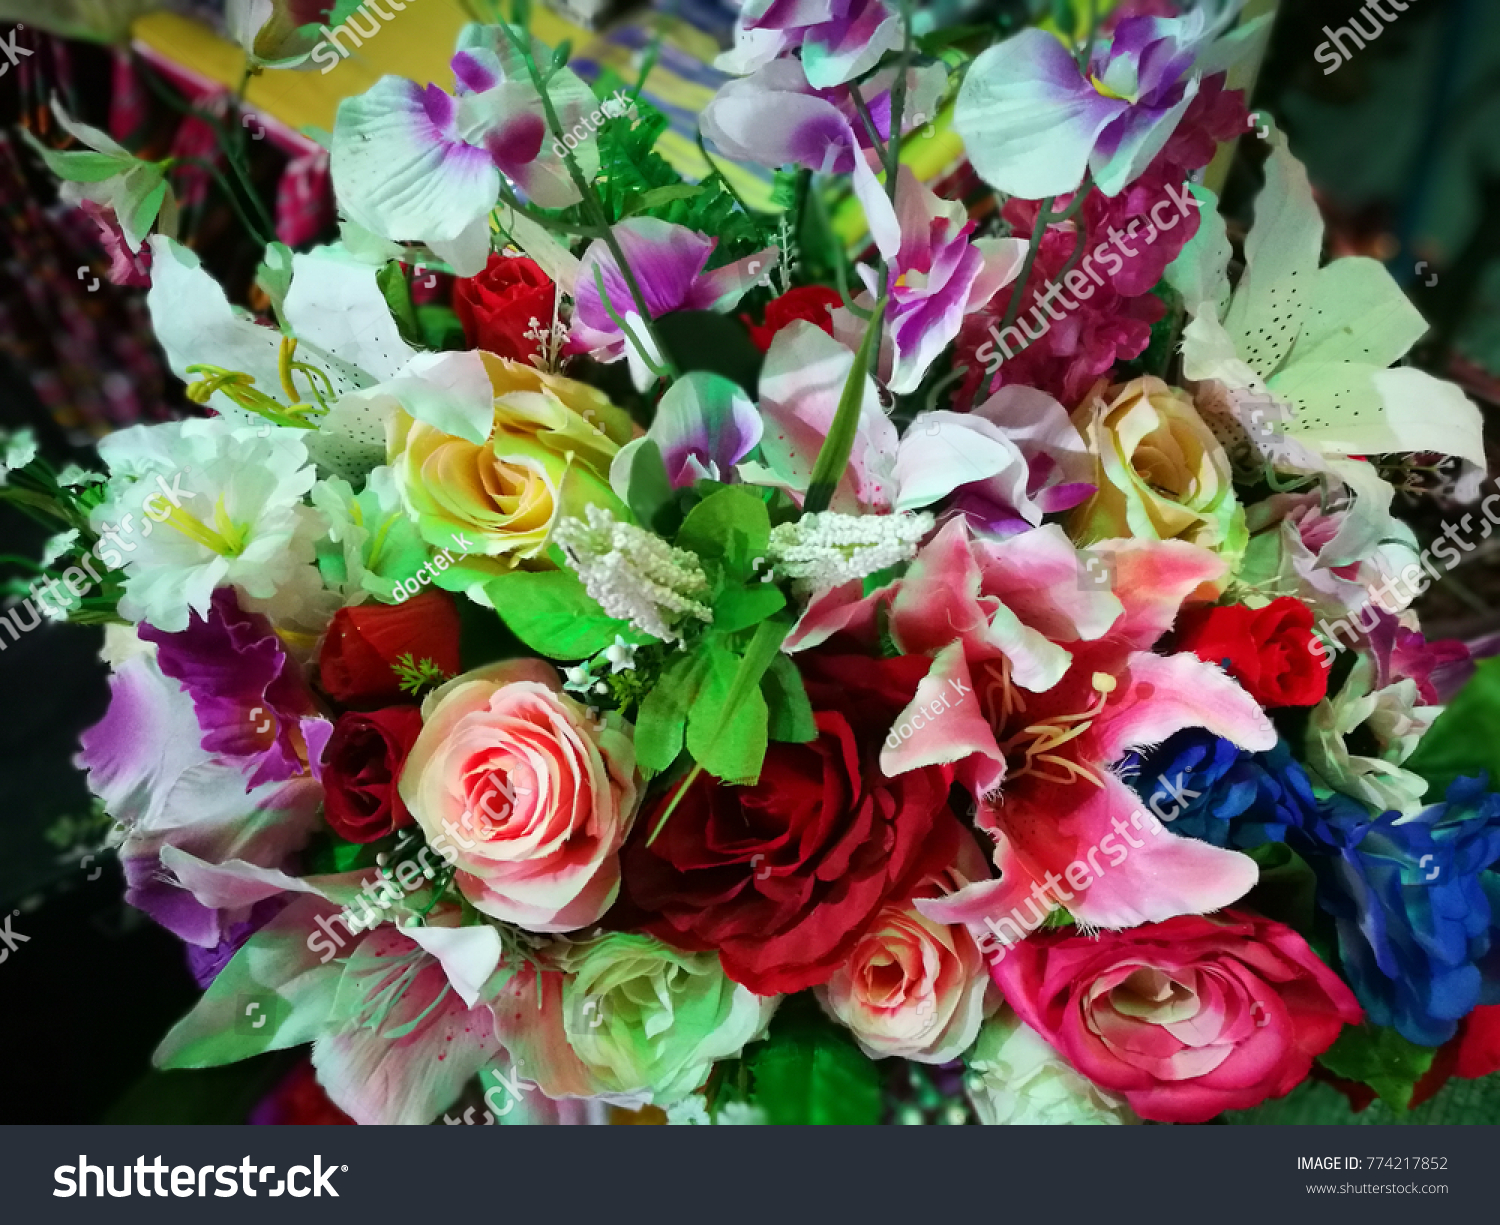 Colorful flowers red, green,yellow purple and pink  in basket .vintage style. #774217852